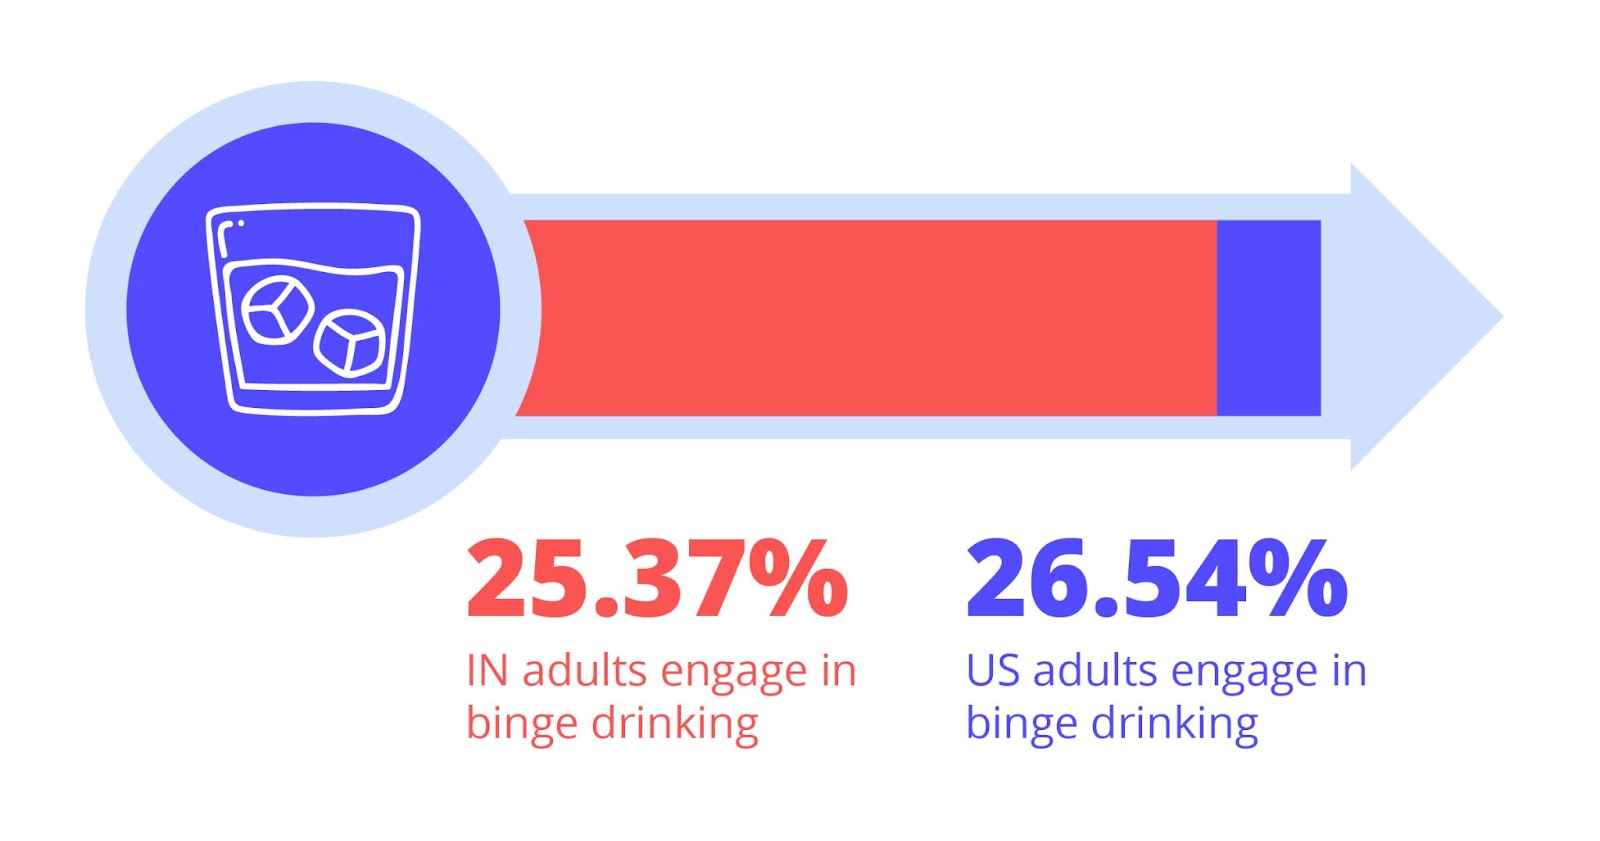 25.37 indiana adults engage in binge drinking. 26.54 american adults engage in binge drinkingValparaiso Treatment for Drug Addiction or Alcoholism